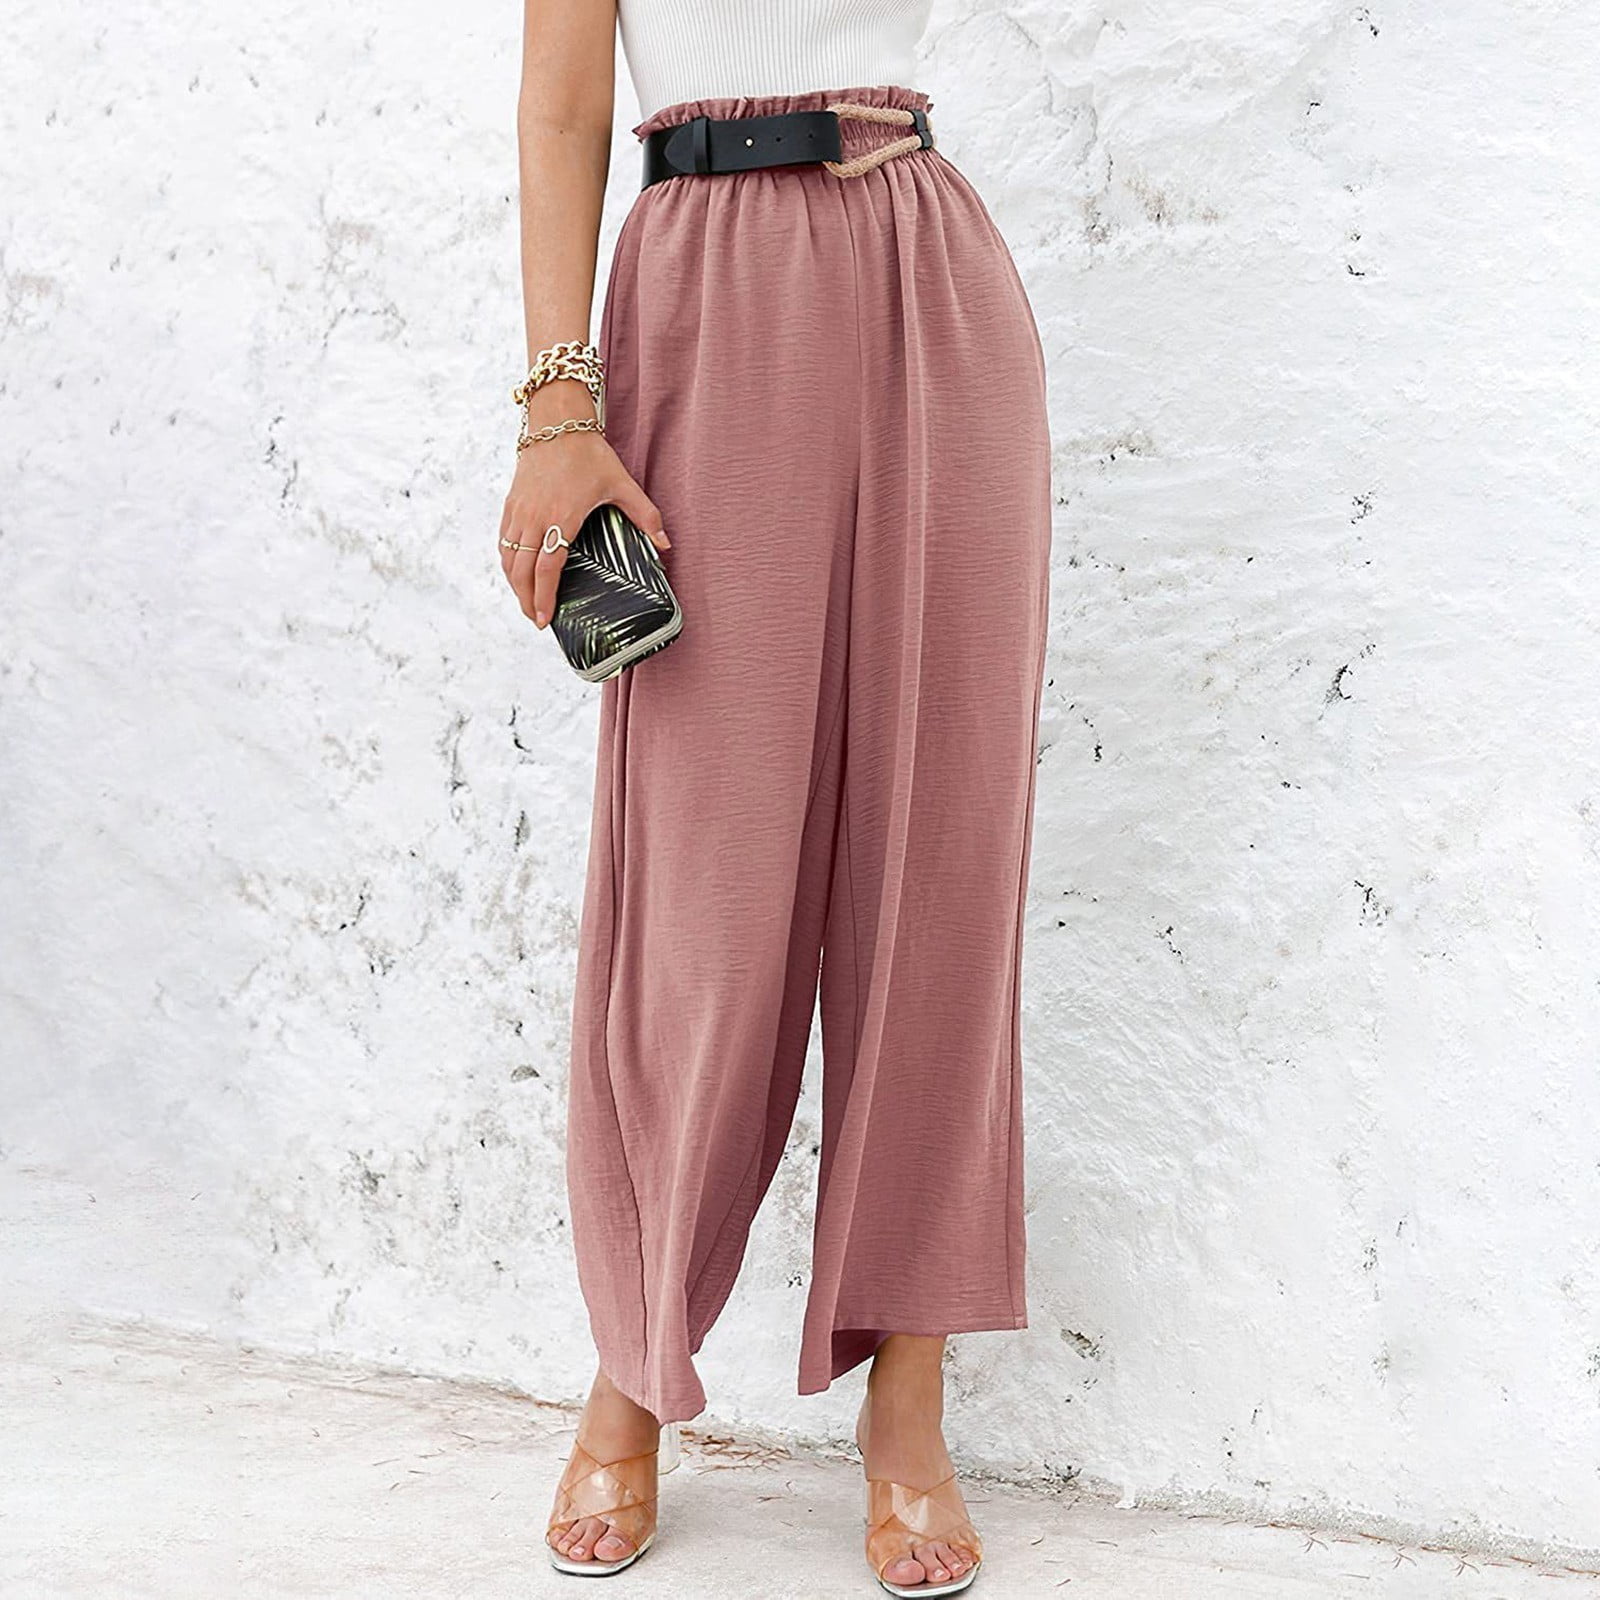 Fashion Forward Tip: Loose Pants for Women at Work | INNERMOD